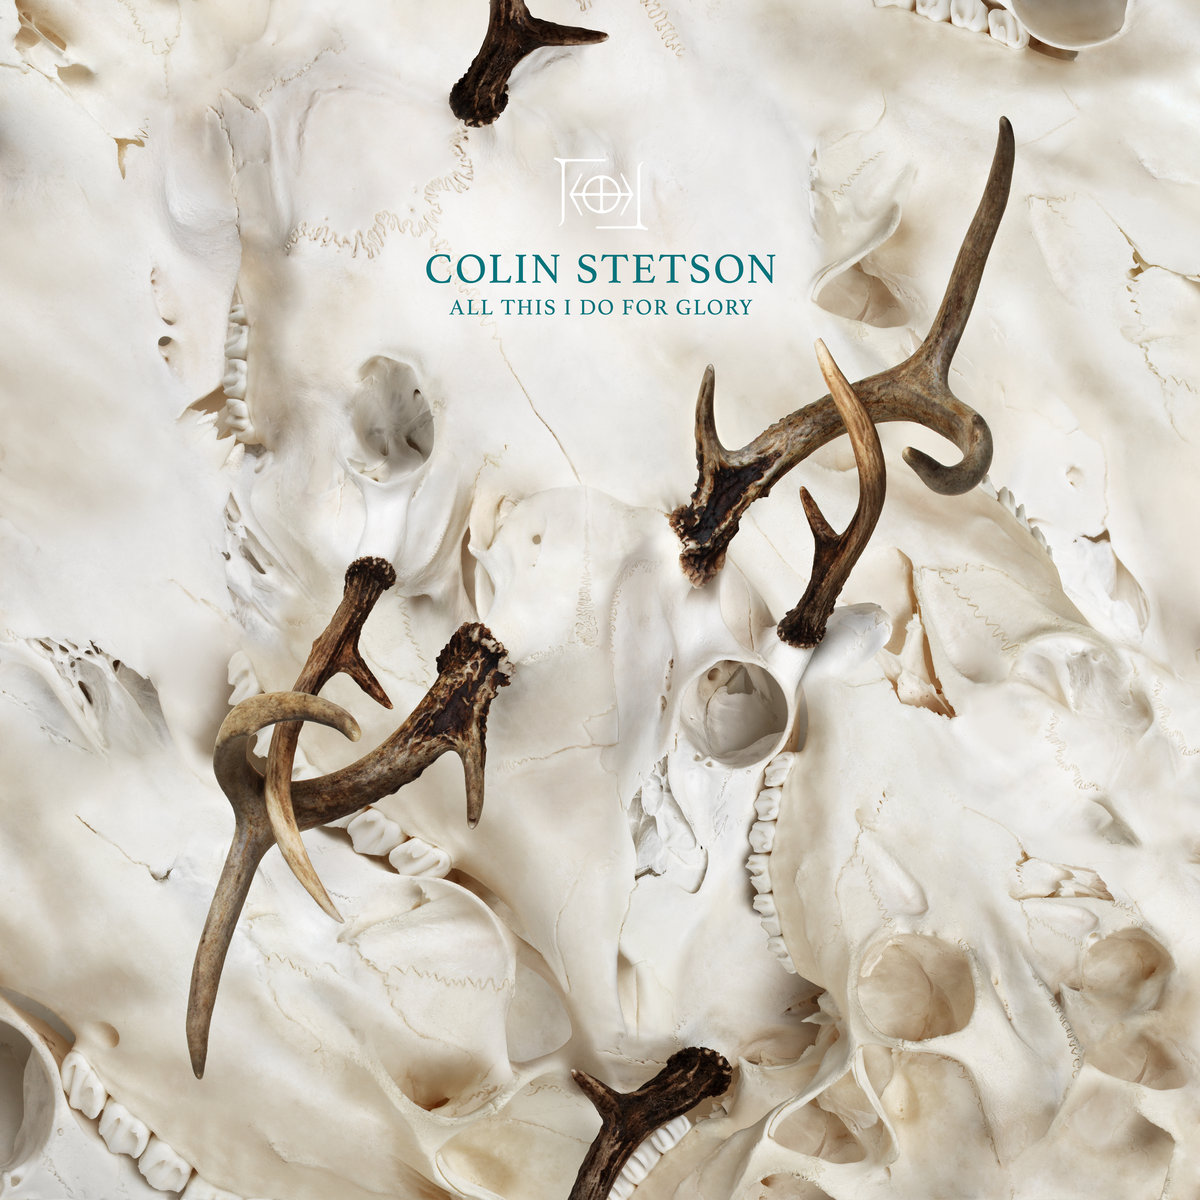 Colin Stetson | All This I Do For Glory | 2017